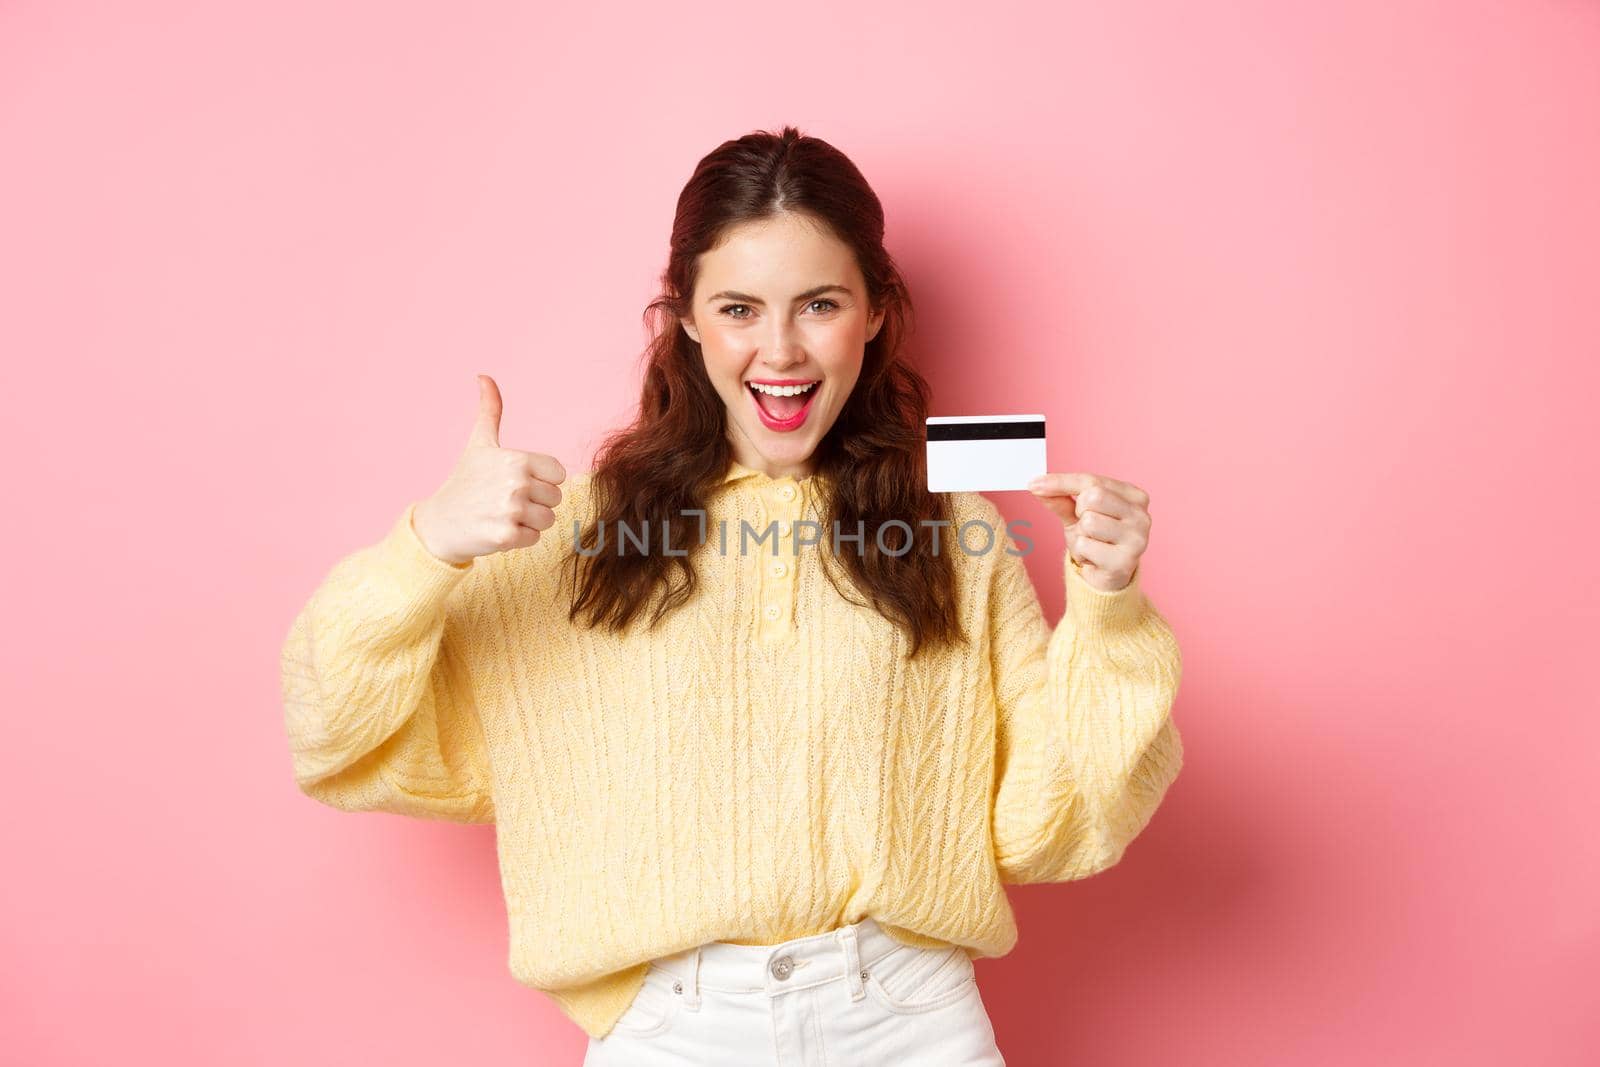 Young modern woman saying yes and showing thumbs up, holding plastic credit card, standing over pink background. Copy space